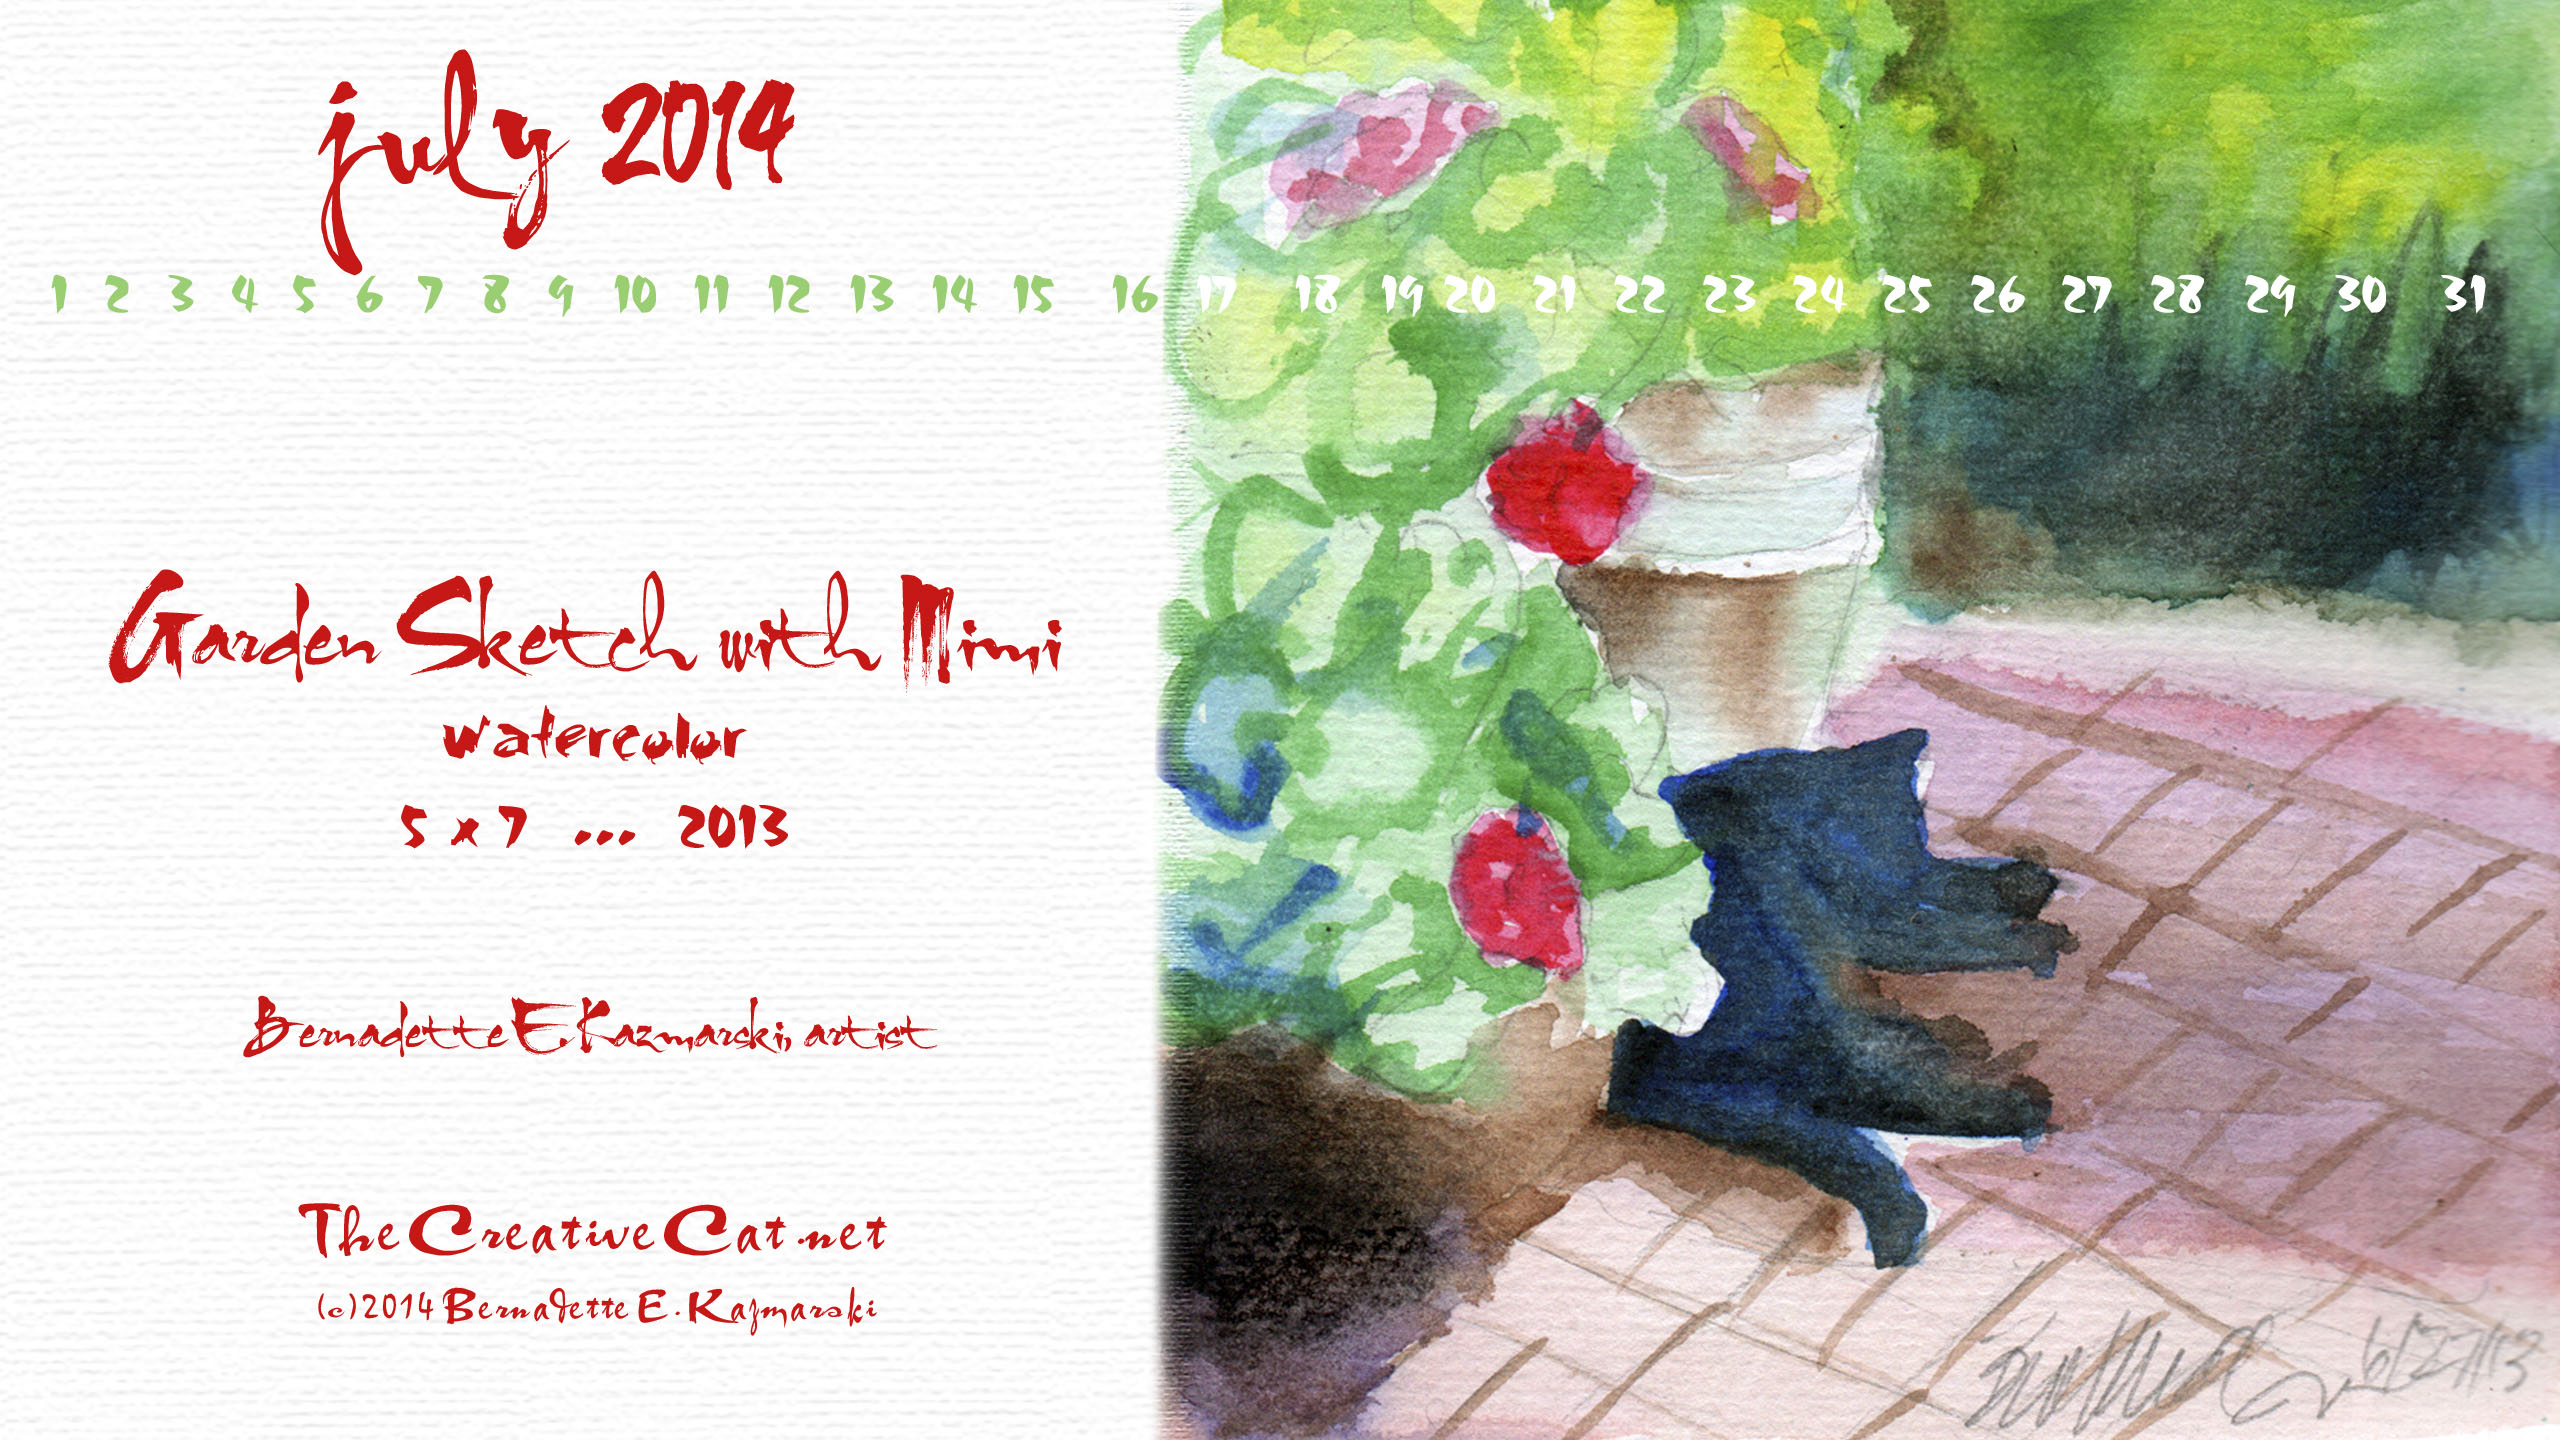 "Garden Sketch with Mimi", 2560 x 1440 for wide and HD monitors desktop calendar